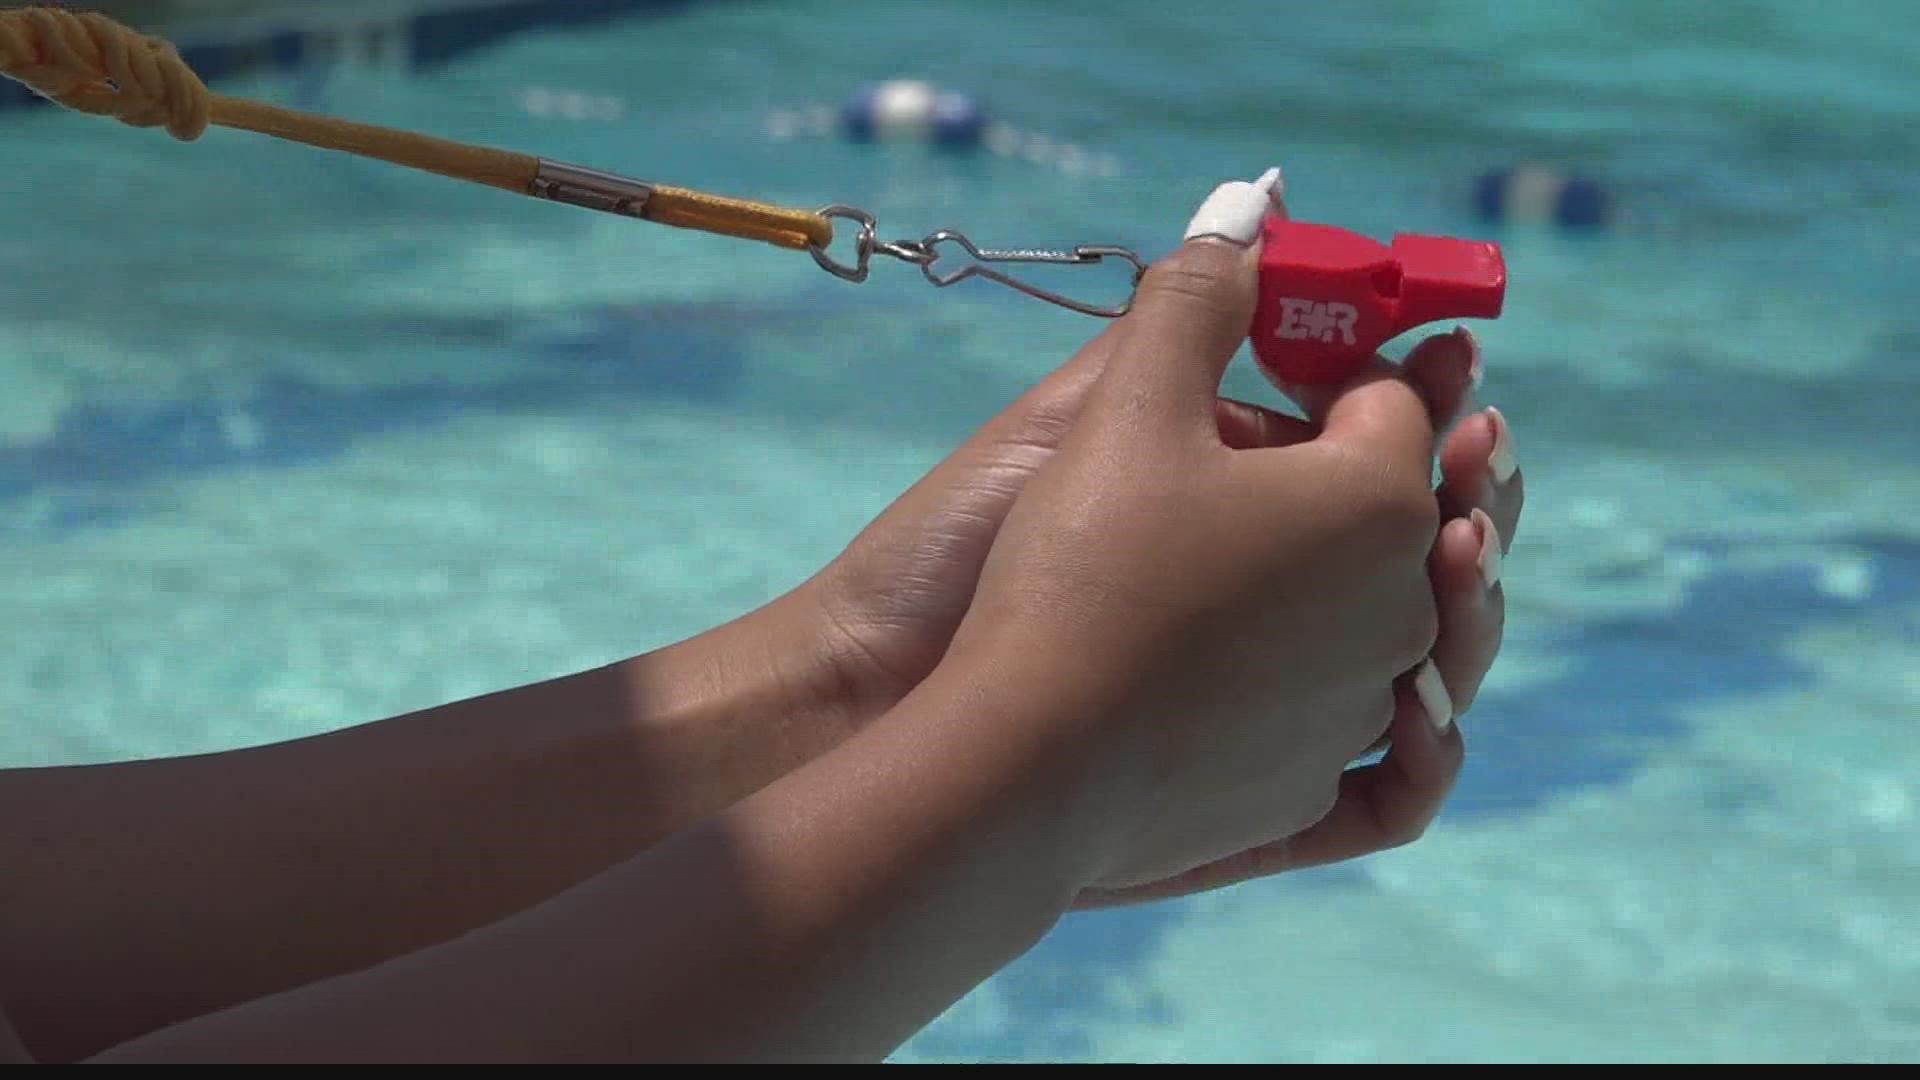 Among a nationwide lifeguard shortage, St. Louis County is now hiring lifeguards for $15 an hour. It will also pay for training and certification.